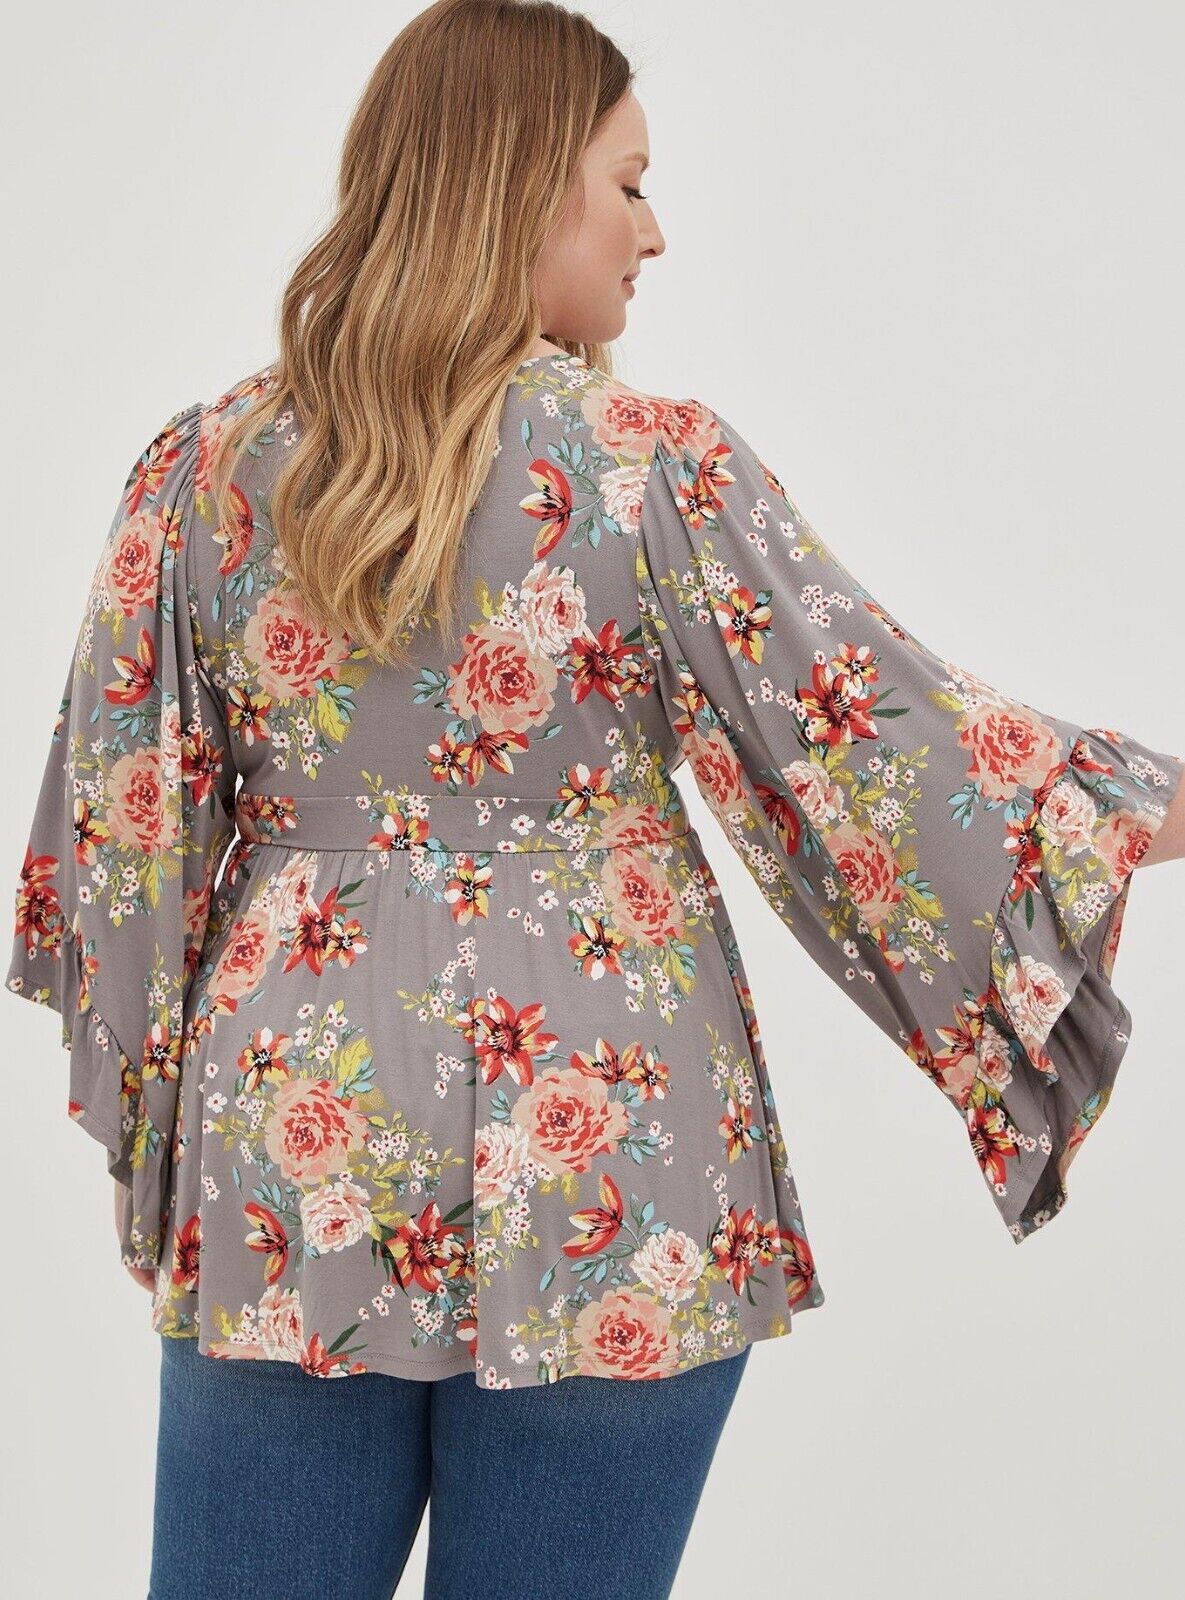 Torrid women's plus size 4X tunic floral blouse/top flare sleeve